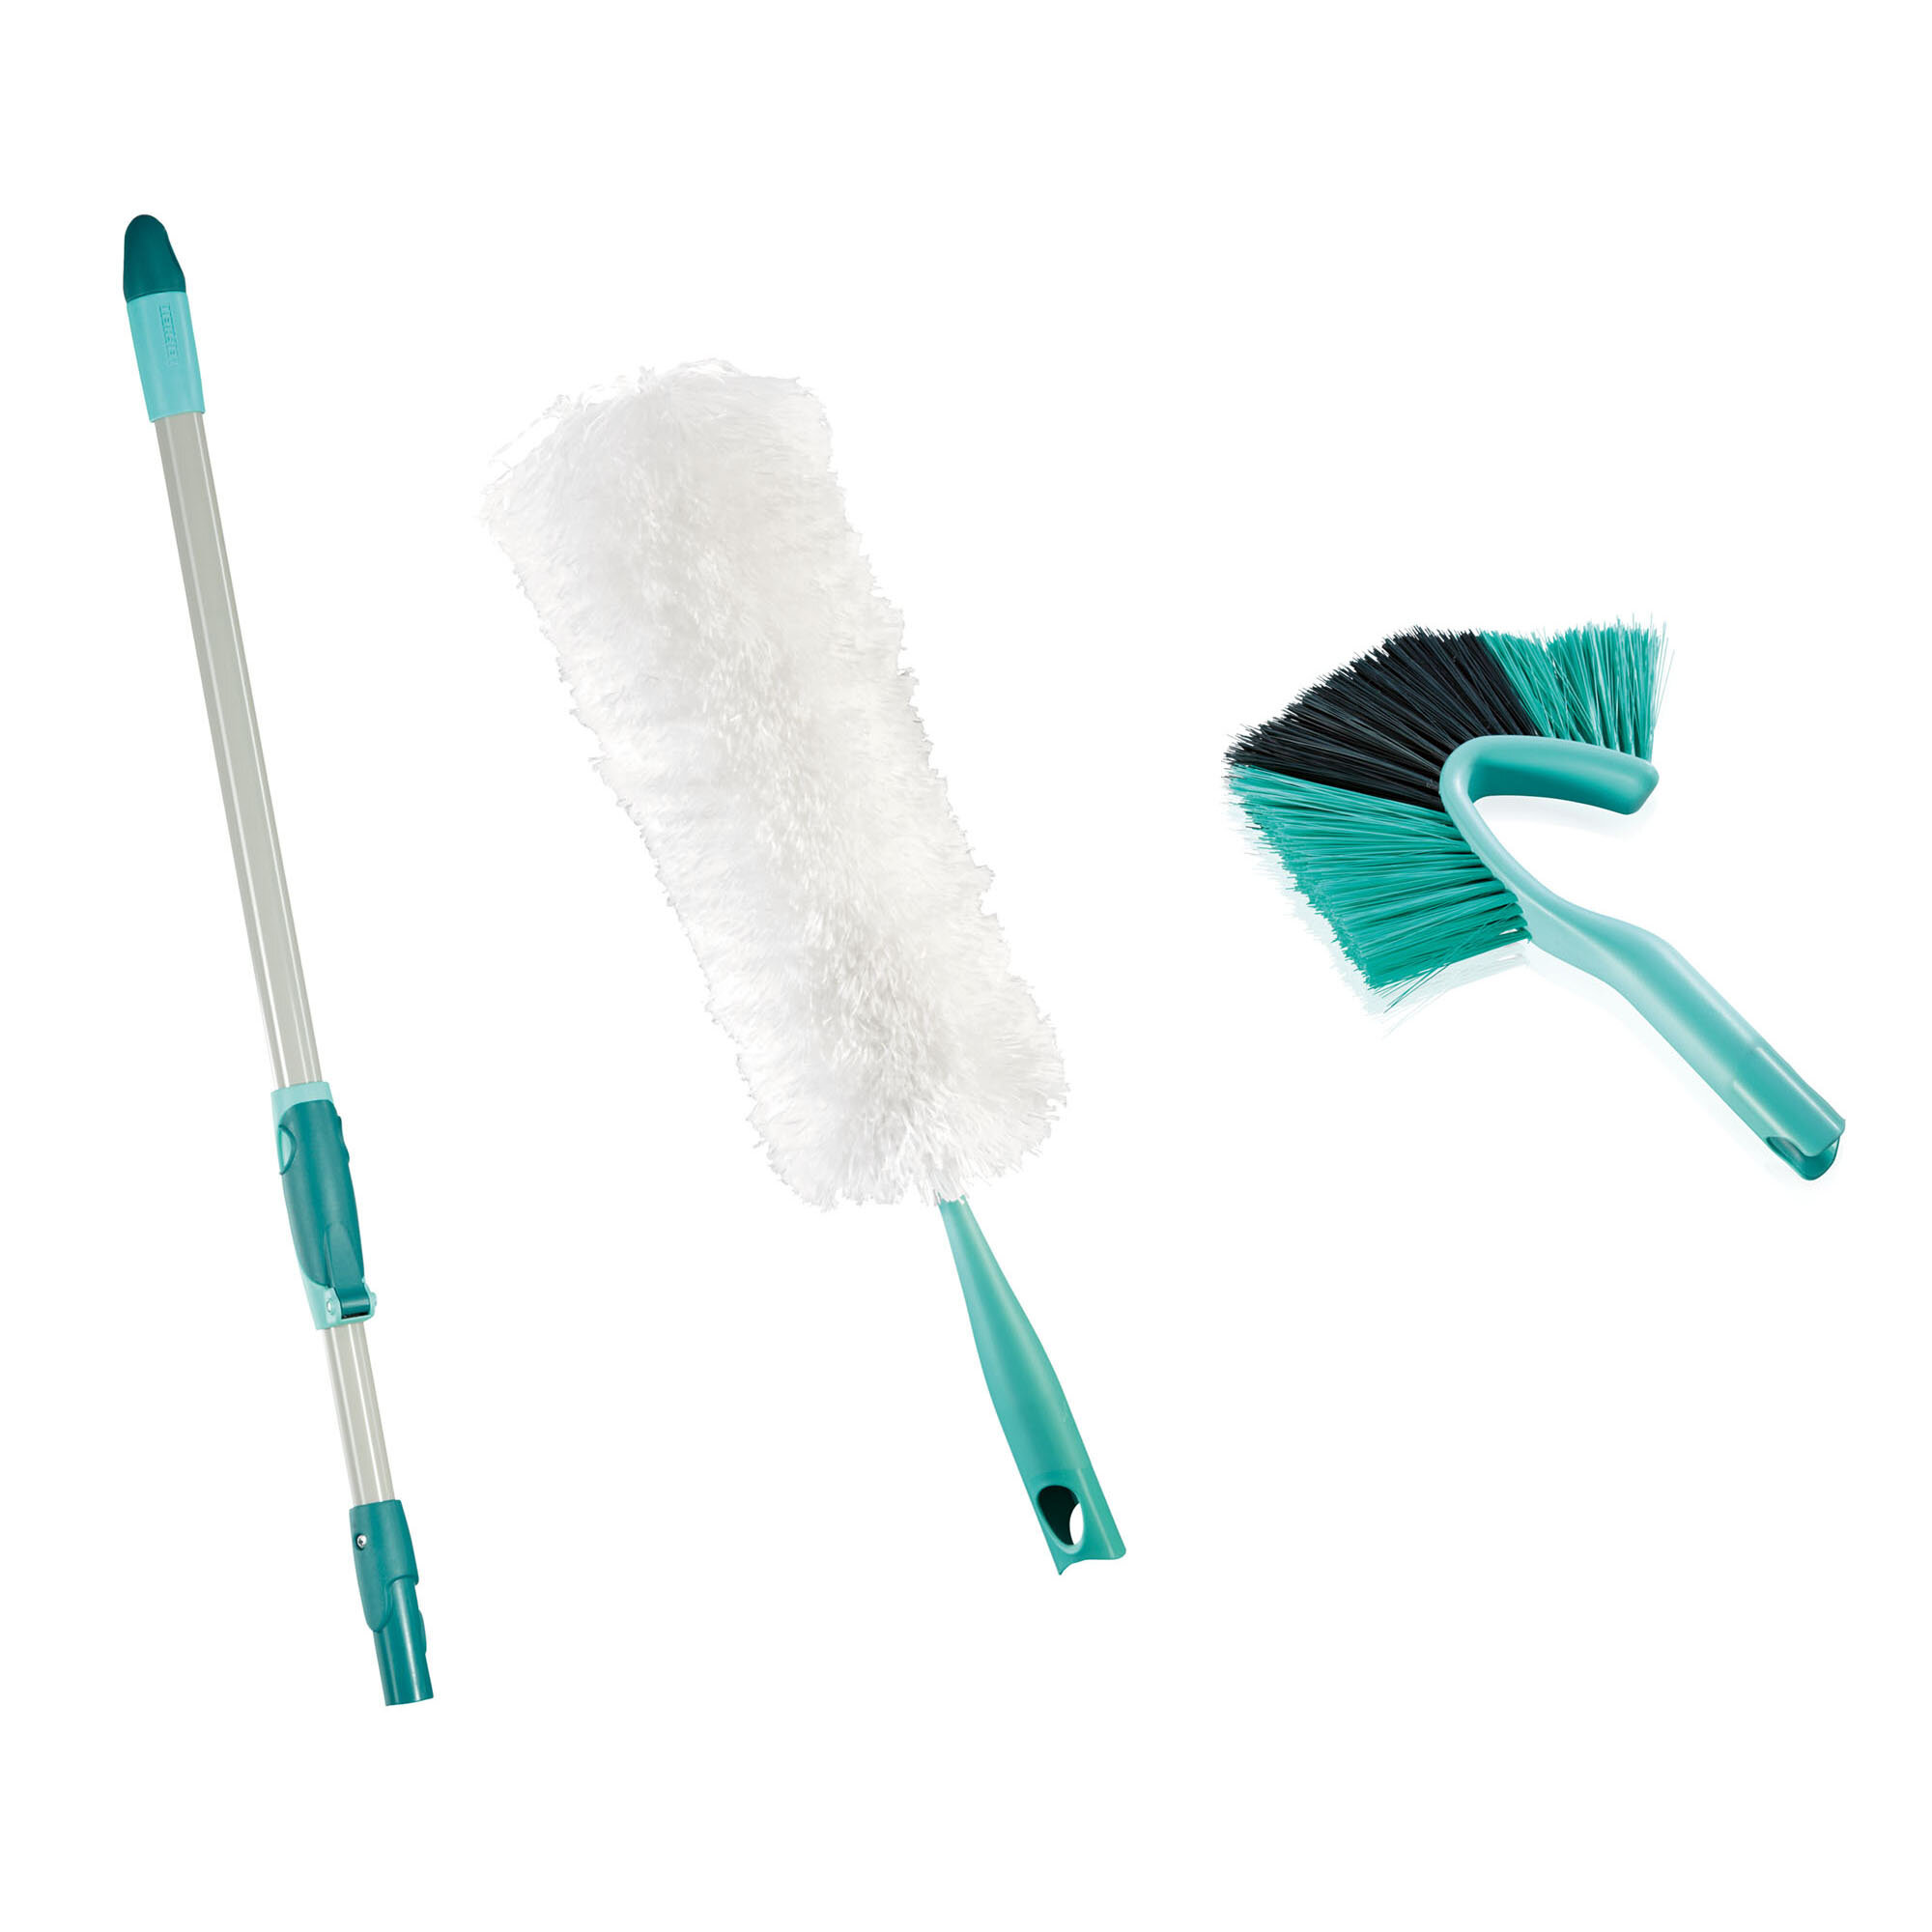 OXO Good Grips Telescopic Duster - When You Need A Little Extra Reach 